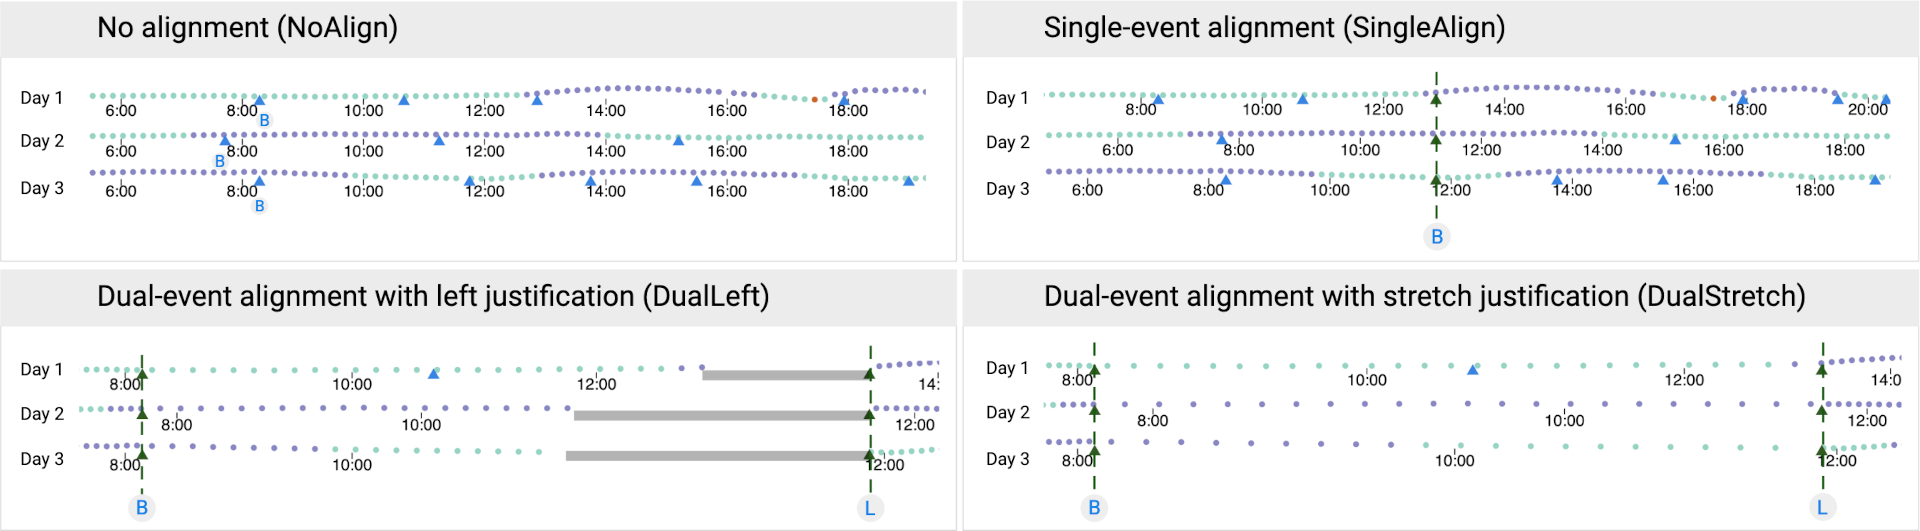 Comparison of the different alignment methods taken into account in the paper: No Alignment, Single-event Alignment, Dual-event Alignment with left justification and Dual-event Alignment with stretch justification.